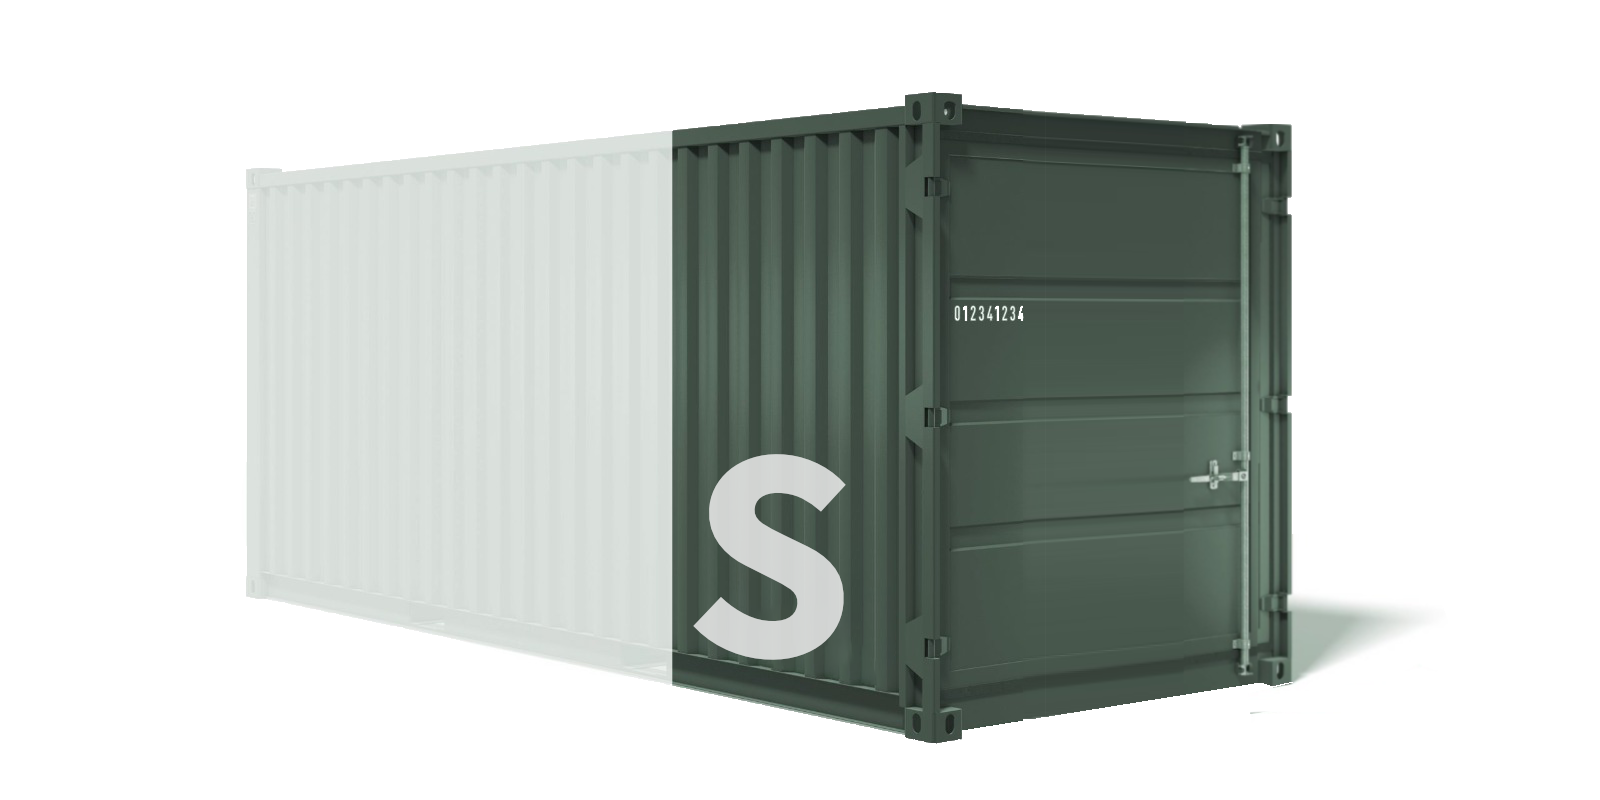 Lagercontainer S - Lagerfläche: 3,50 m2 / 8,58 m3